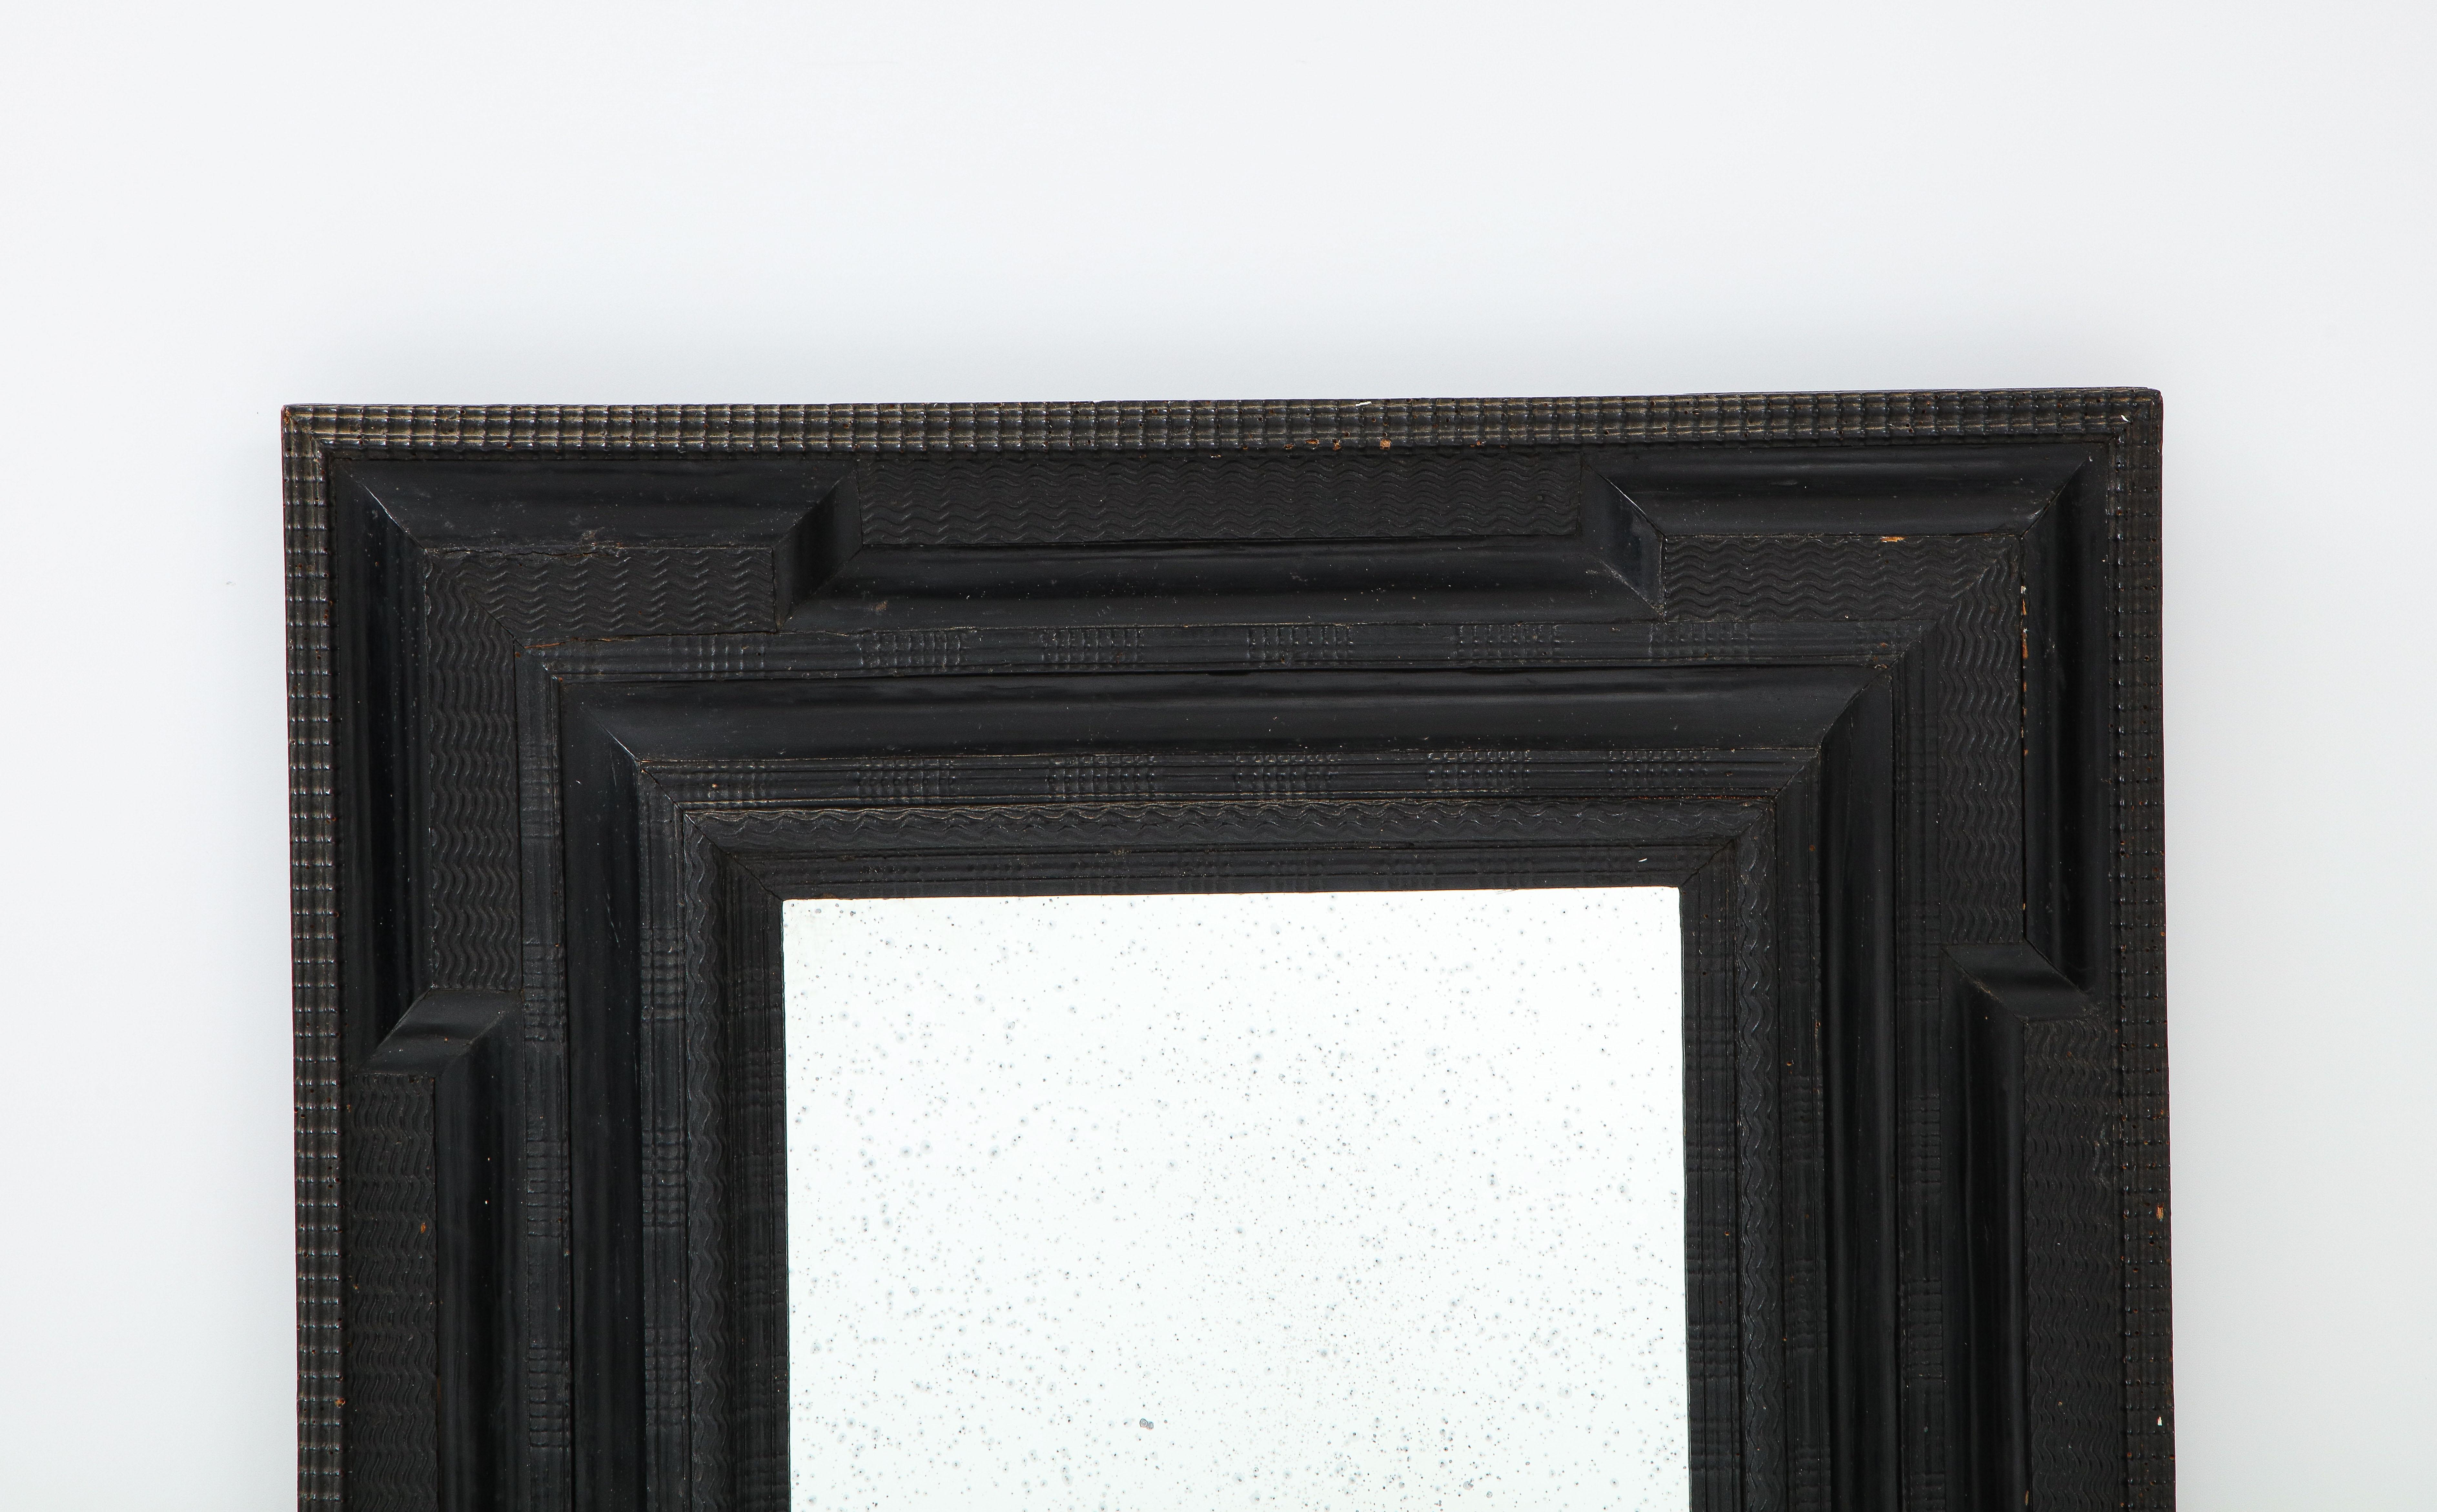 An exceptional Northern Italian Baroque intricately carved ebonized frame, inset with antiqued mirror glass. The frame with cove carved 'ripple' molding and its original forged iron hook on the back. These style of frames are usually referred to as